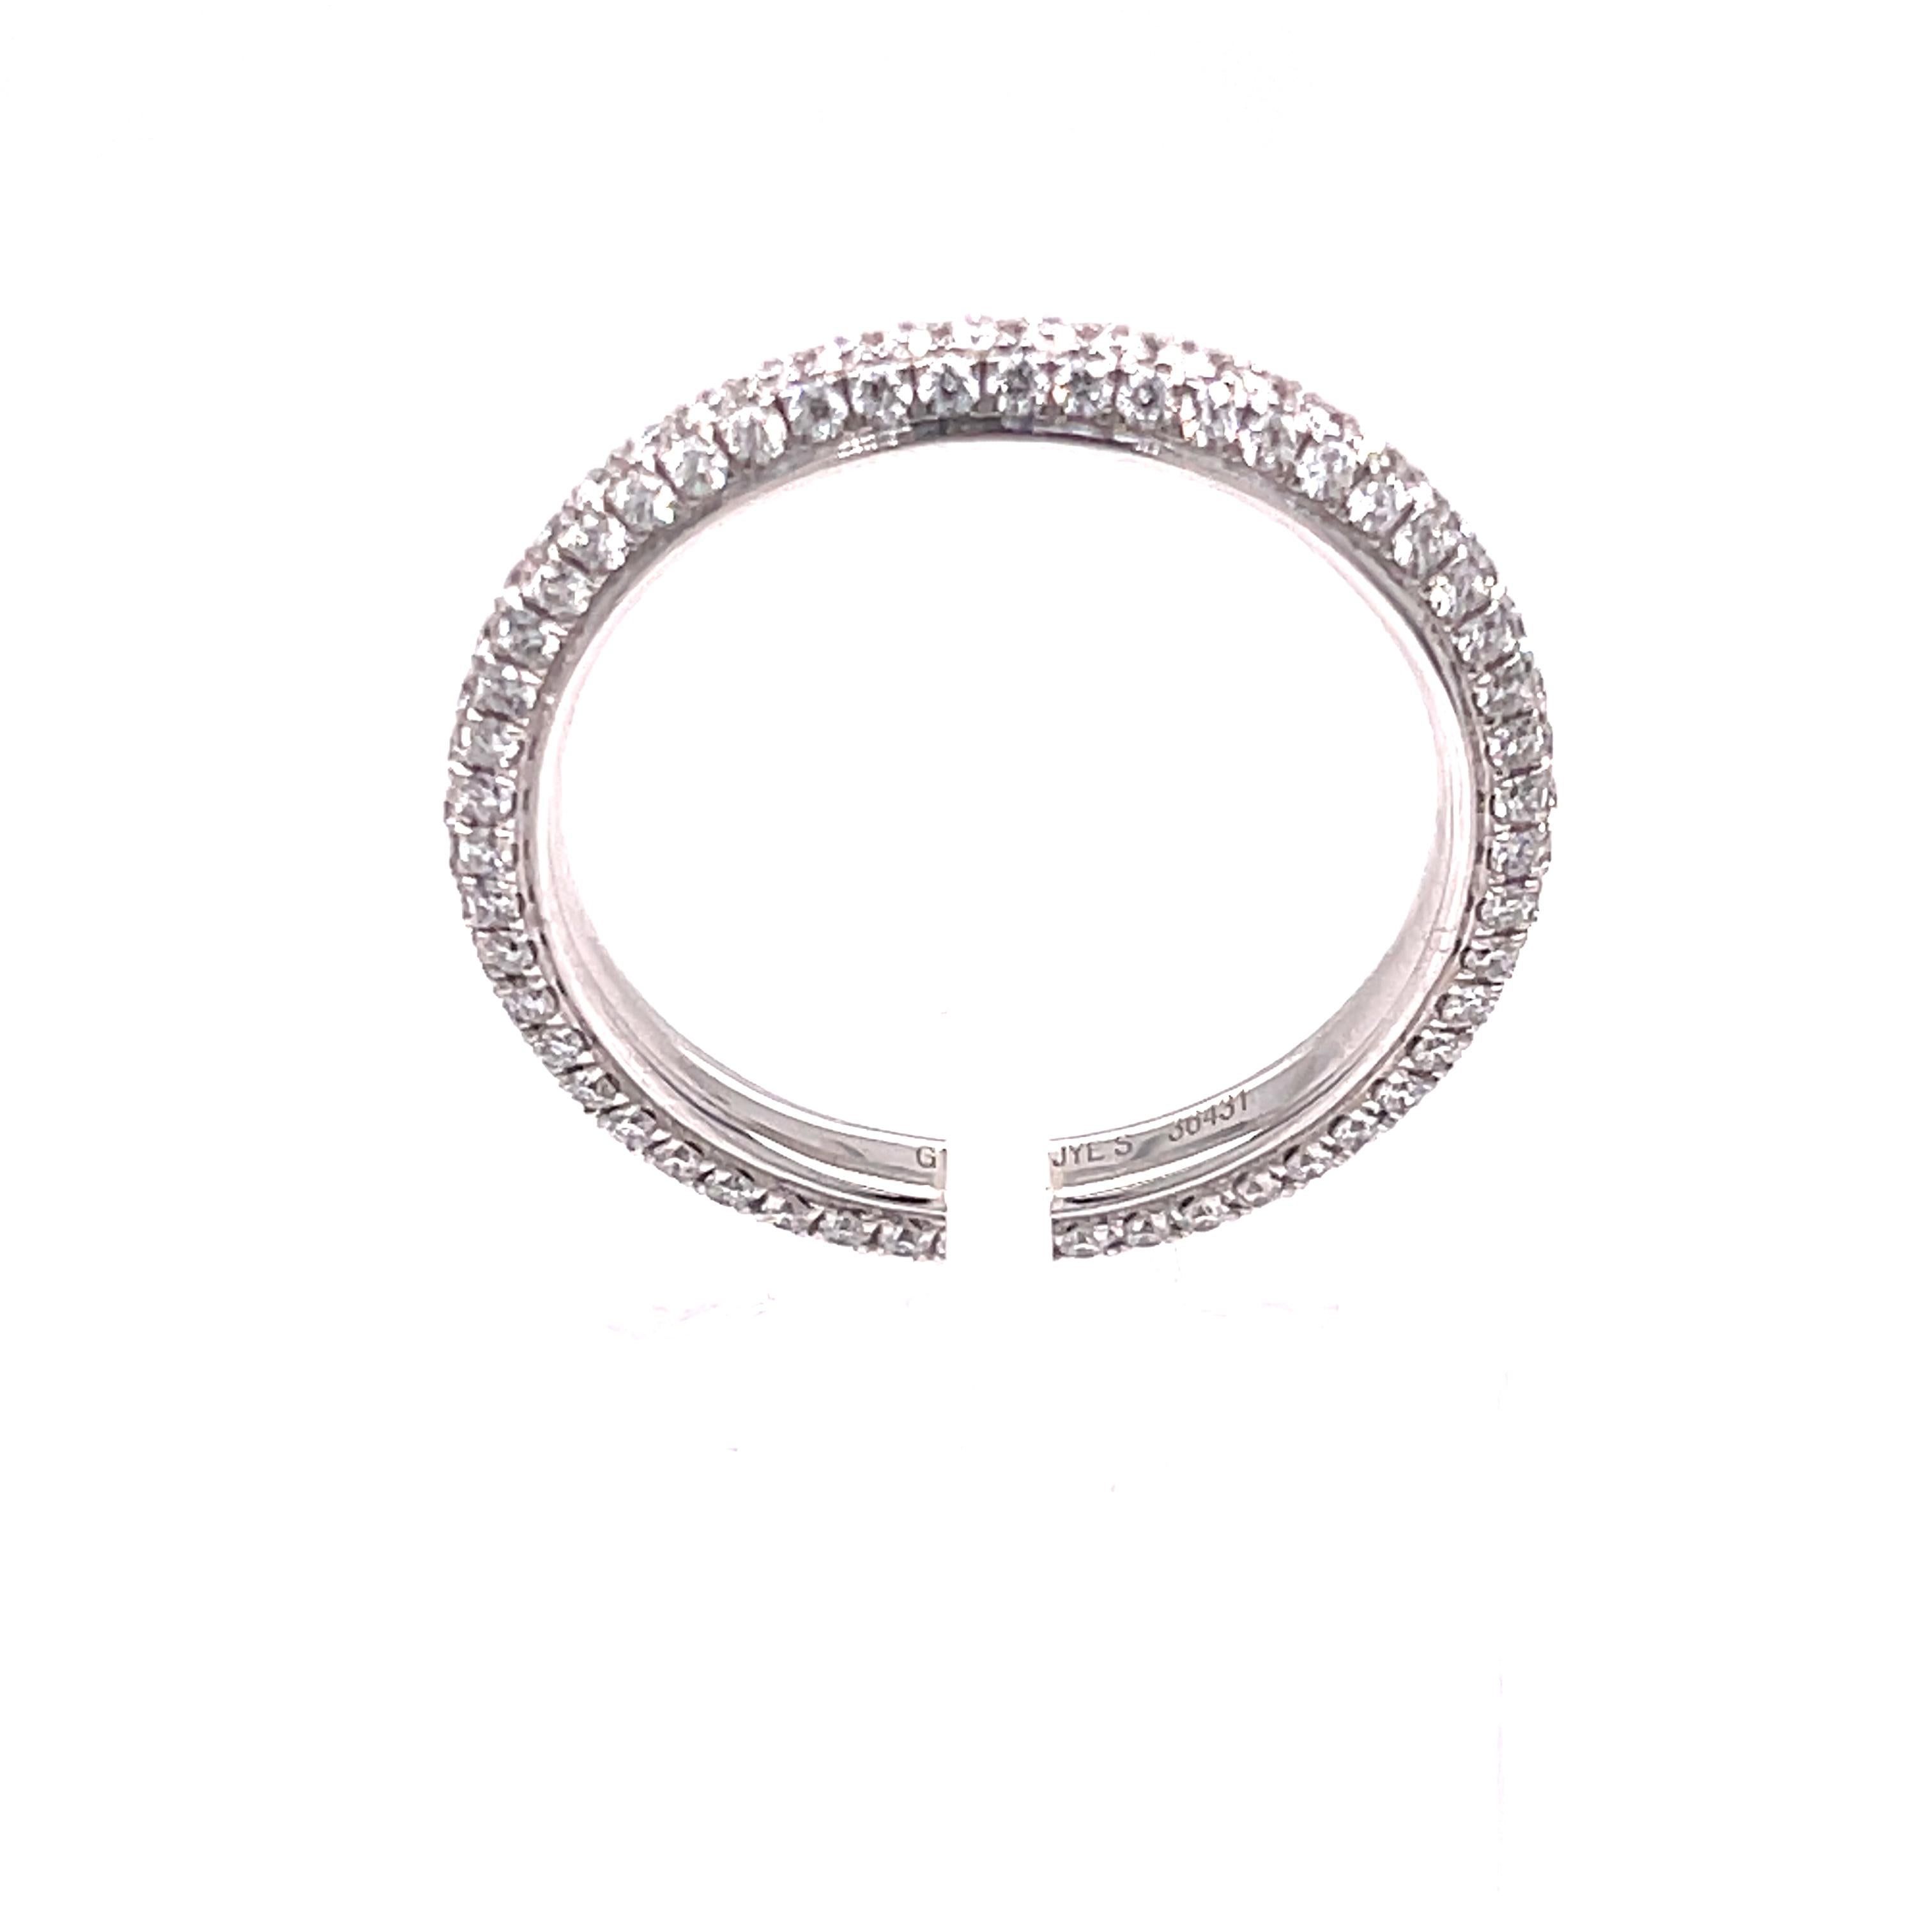 Diamond eternity band in 18K white gold. The band features 0.79ctw of pave set diamonds. The ring is size 6. 